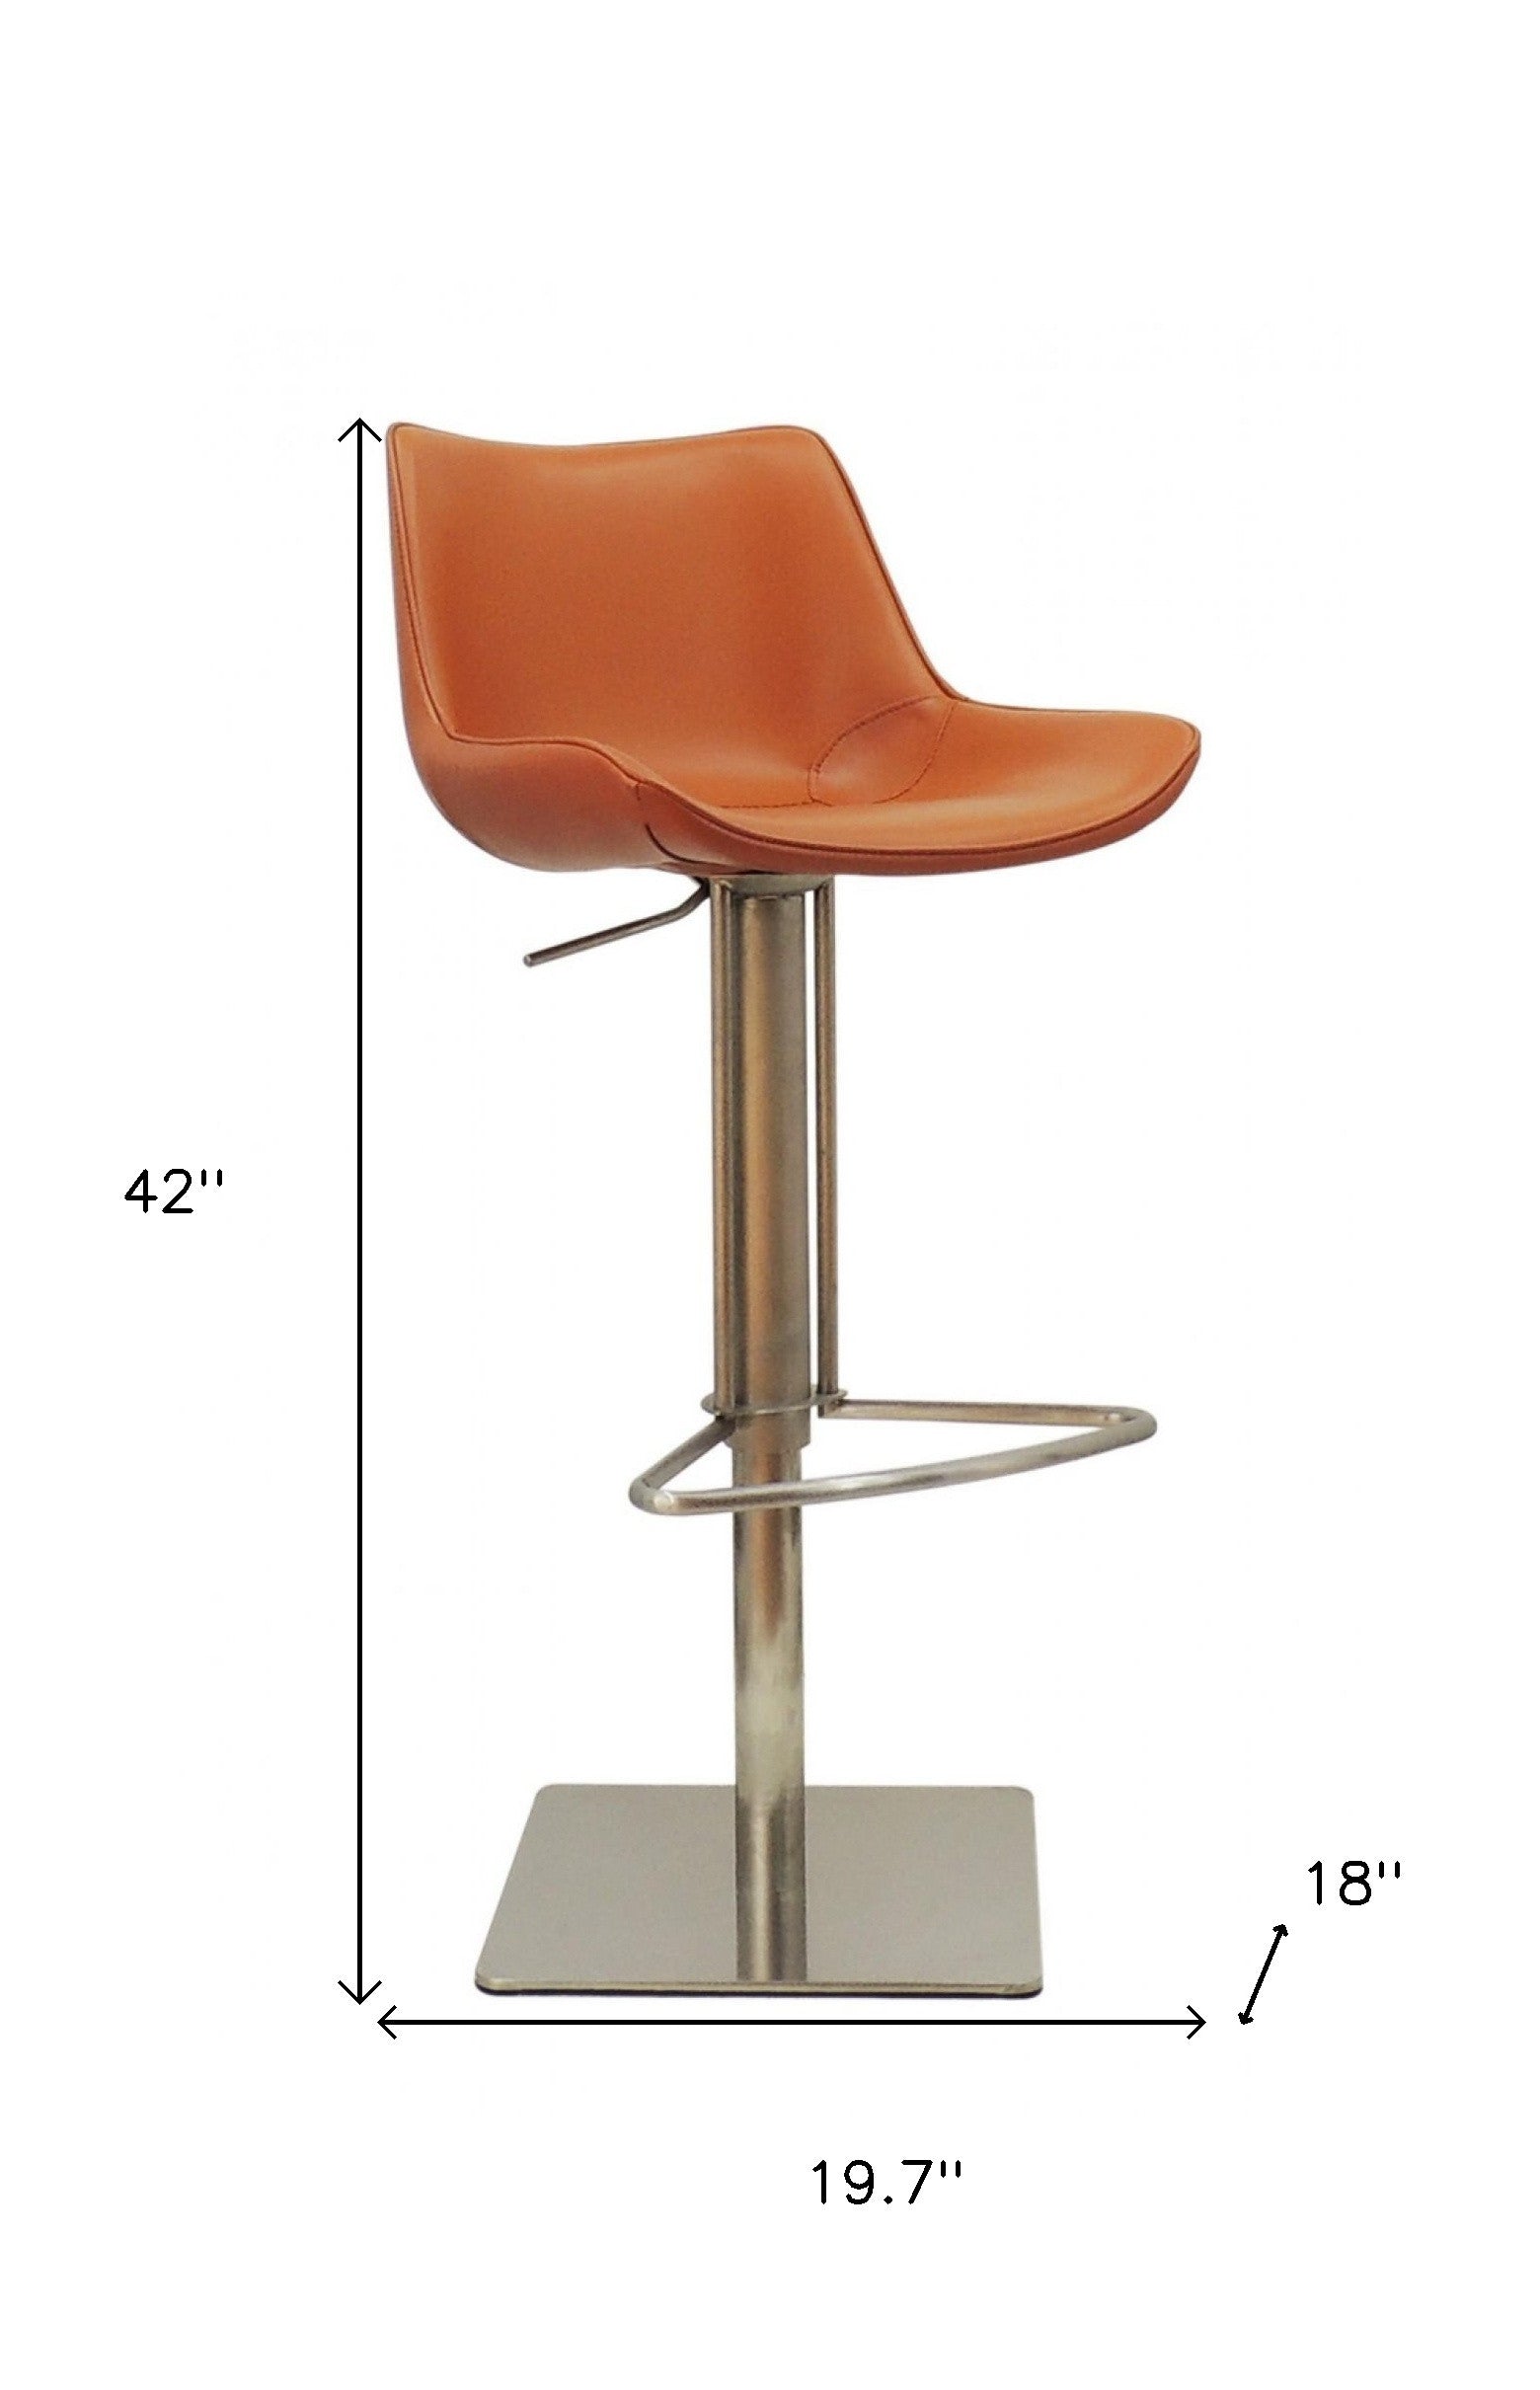 31" Terra Cotta And Silver Faux Leather And Stainless Steel Swivel Bar Height Bar Chair